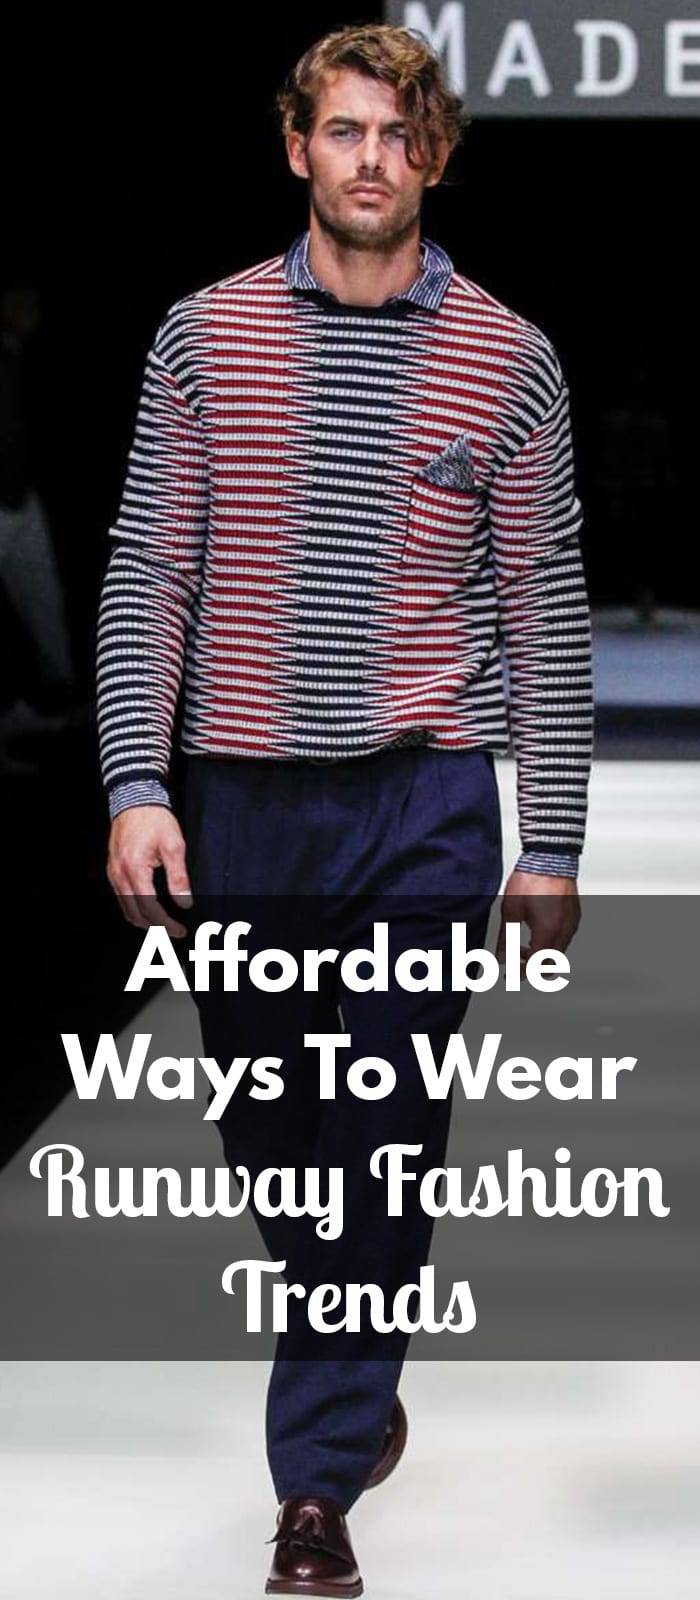 Affordable Ways To Wear Runway Fashion Trends